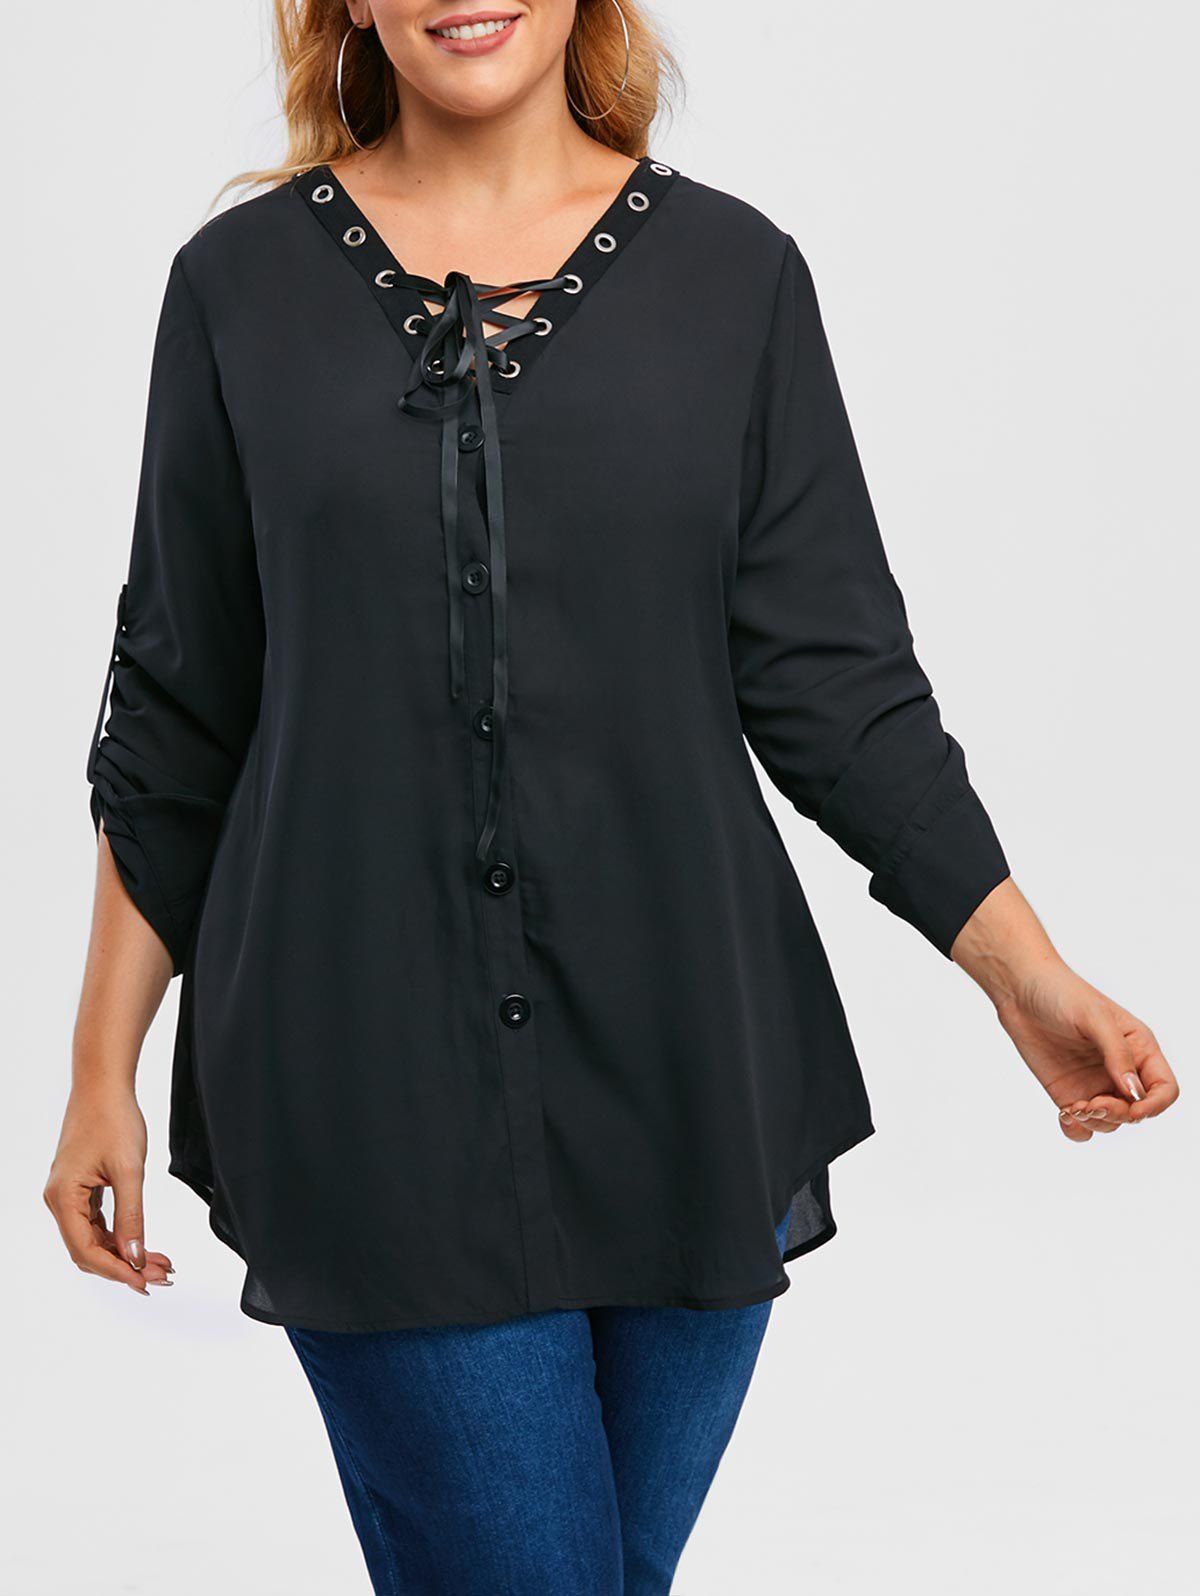 Plus Size Lace Up Roll Up Sleeve Chiffon Top - BLACK 2X